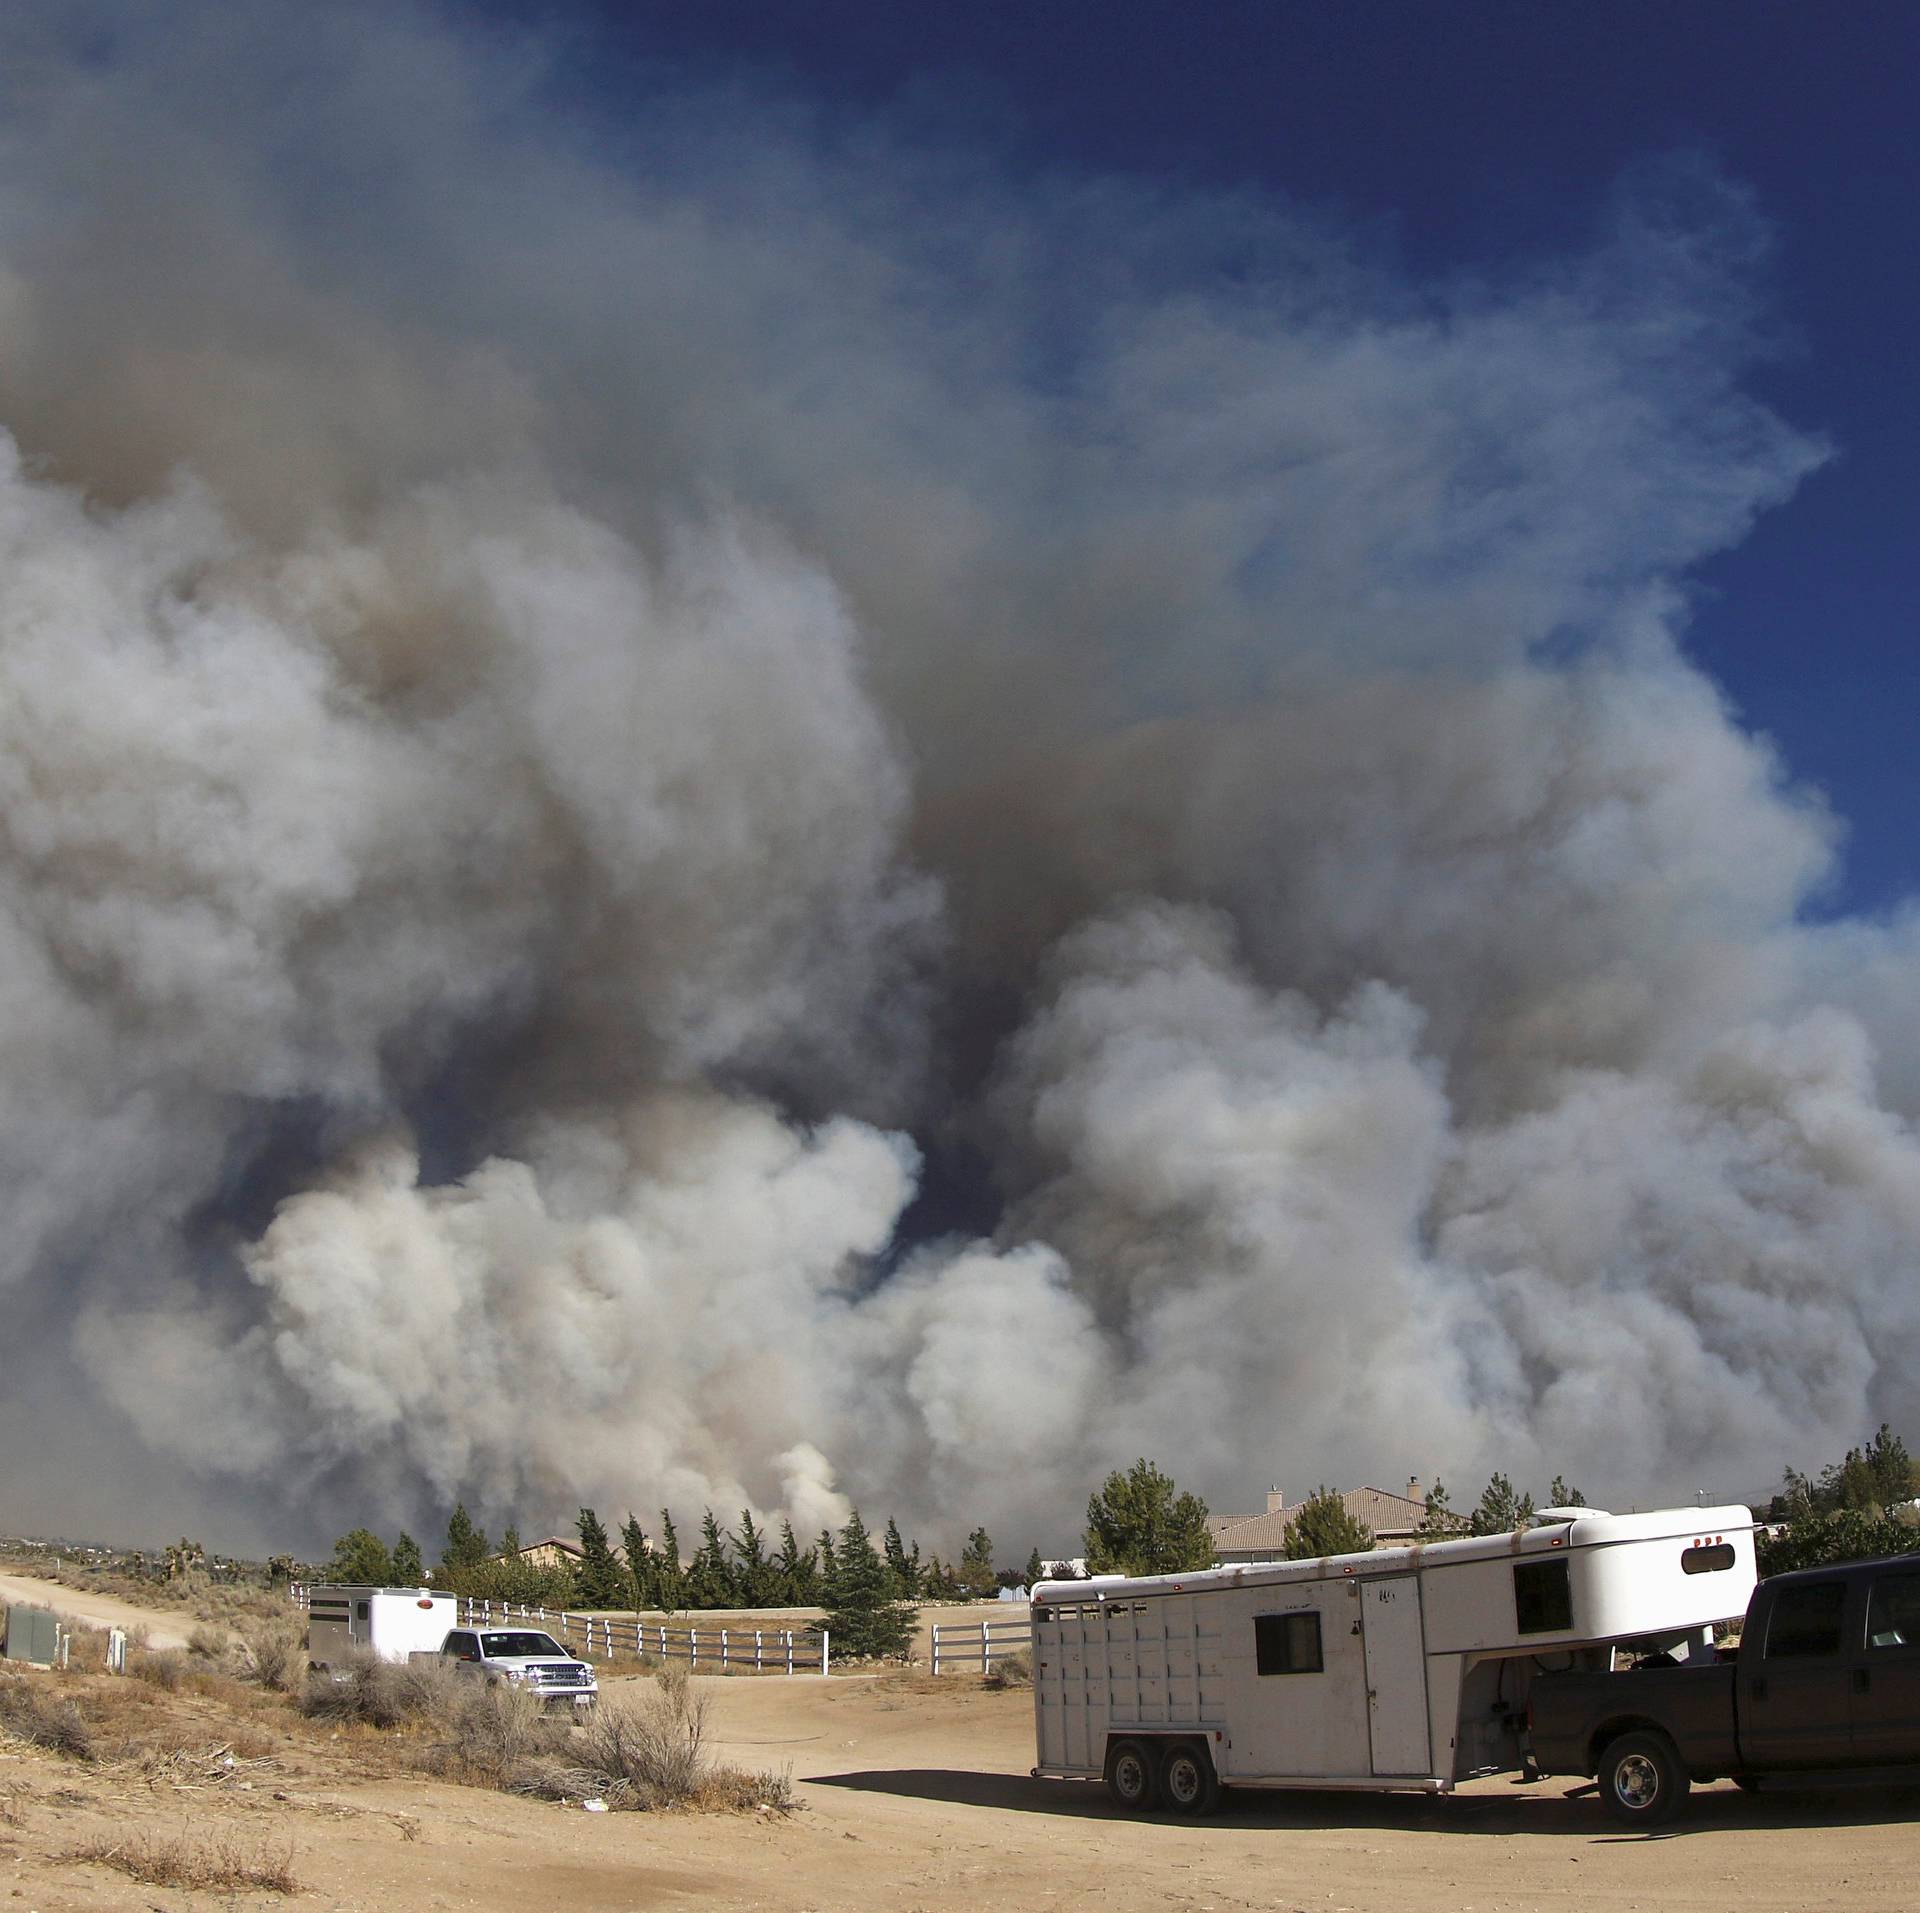 People evacuate their horses as smoke fills the skies in this photo taken with an extreme wide angle lens at the so-called Bluecut Fire in San Bernardino County, California